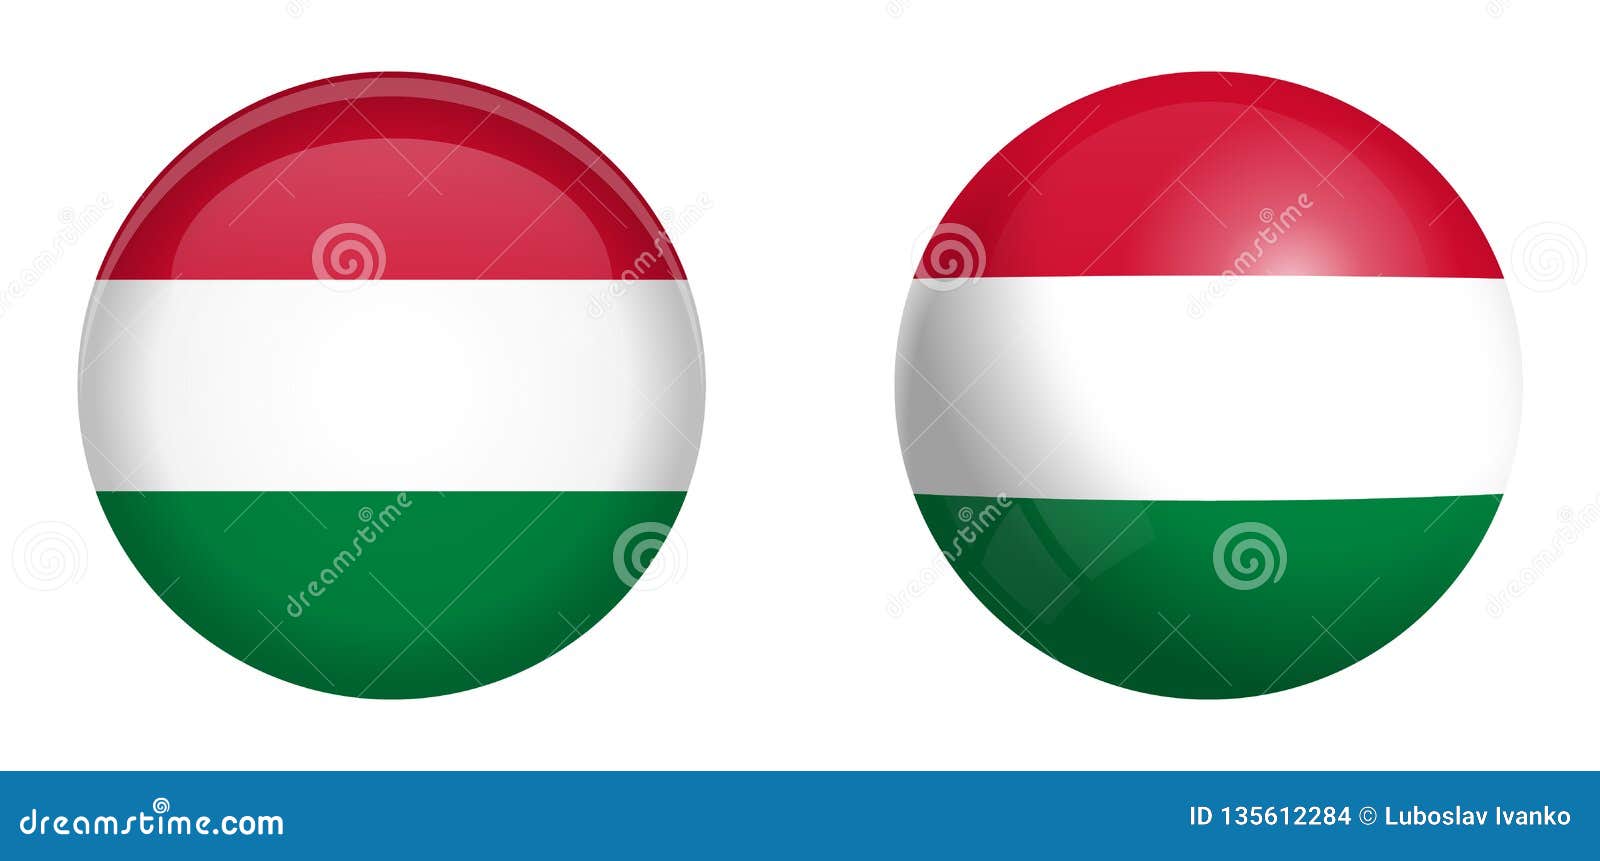 hungary flag under 3d dome button and on glossy sphere / ball